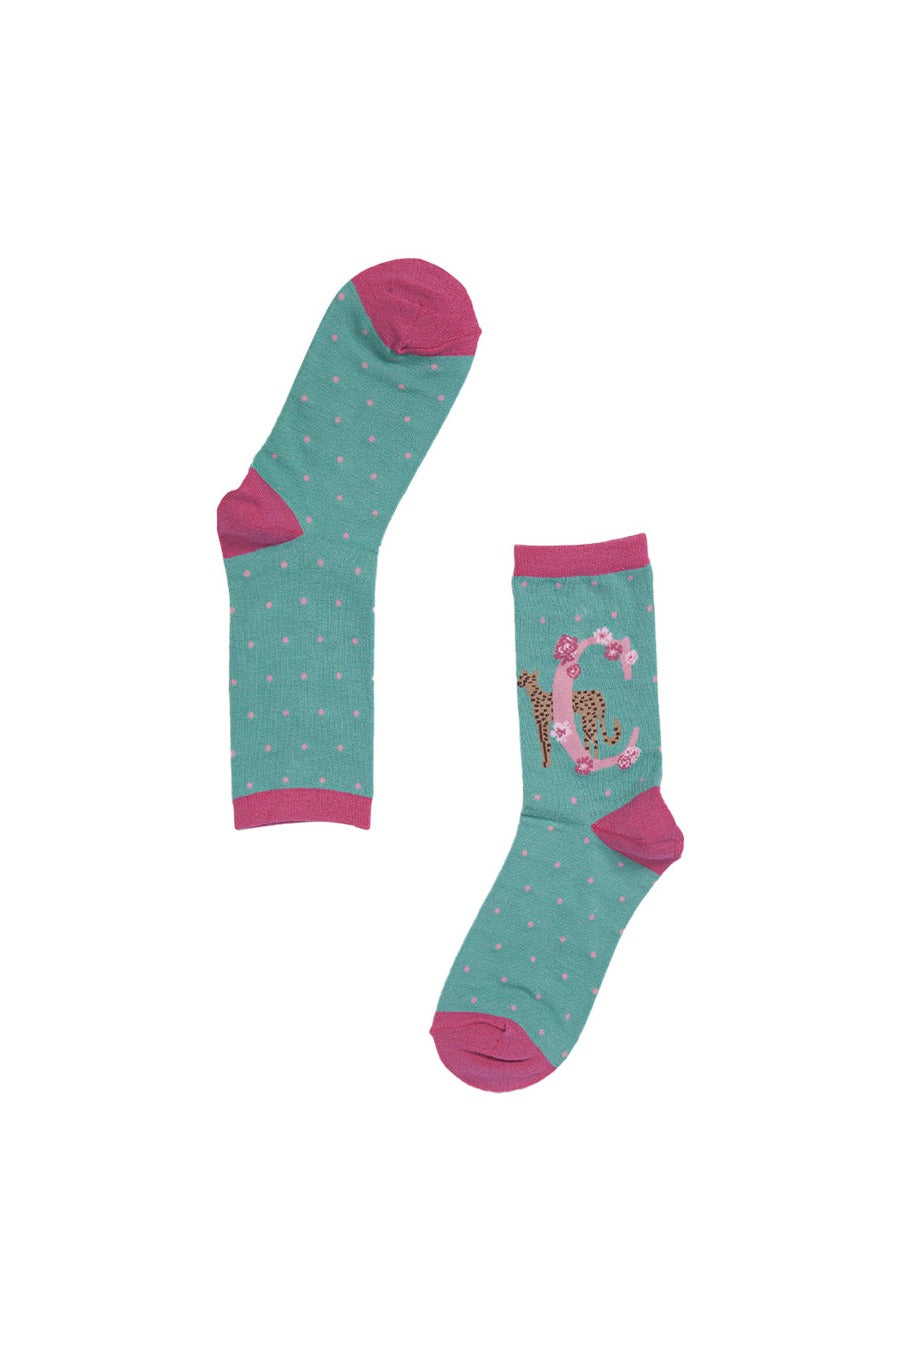 green, pink bamboo socks with the initial C